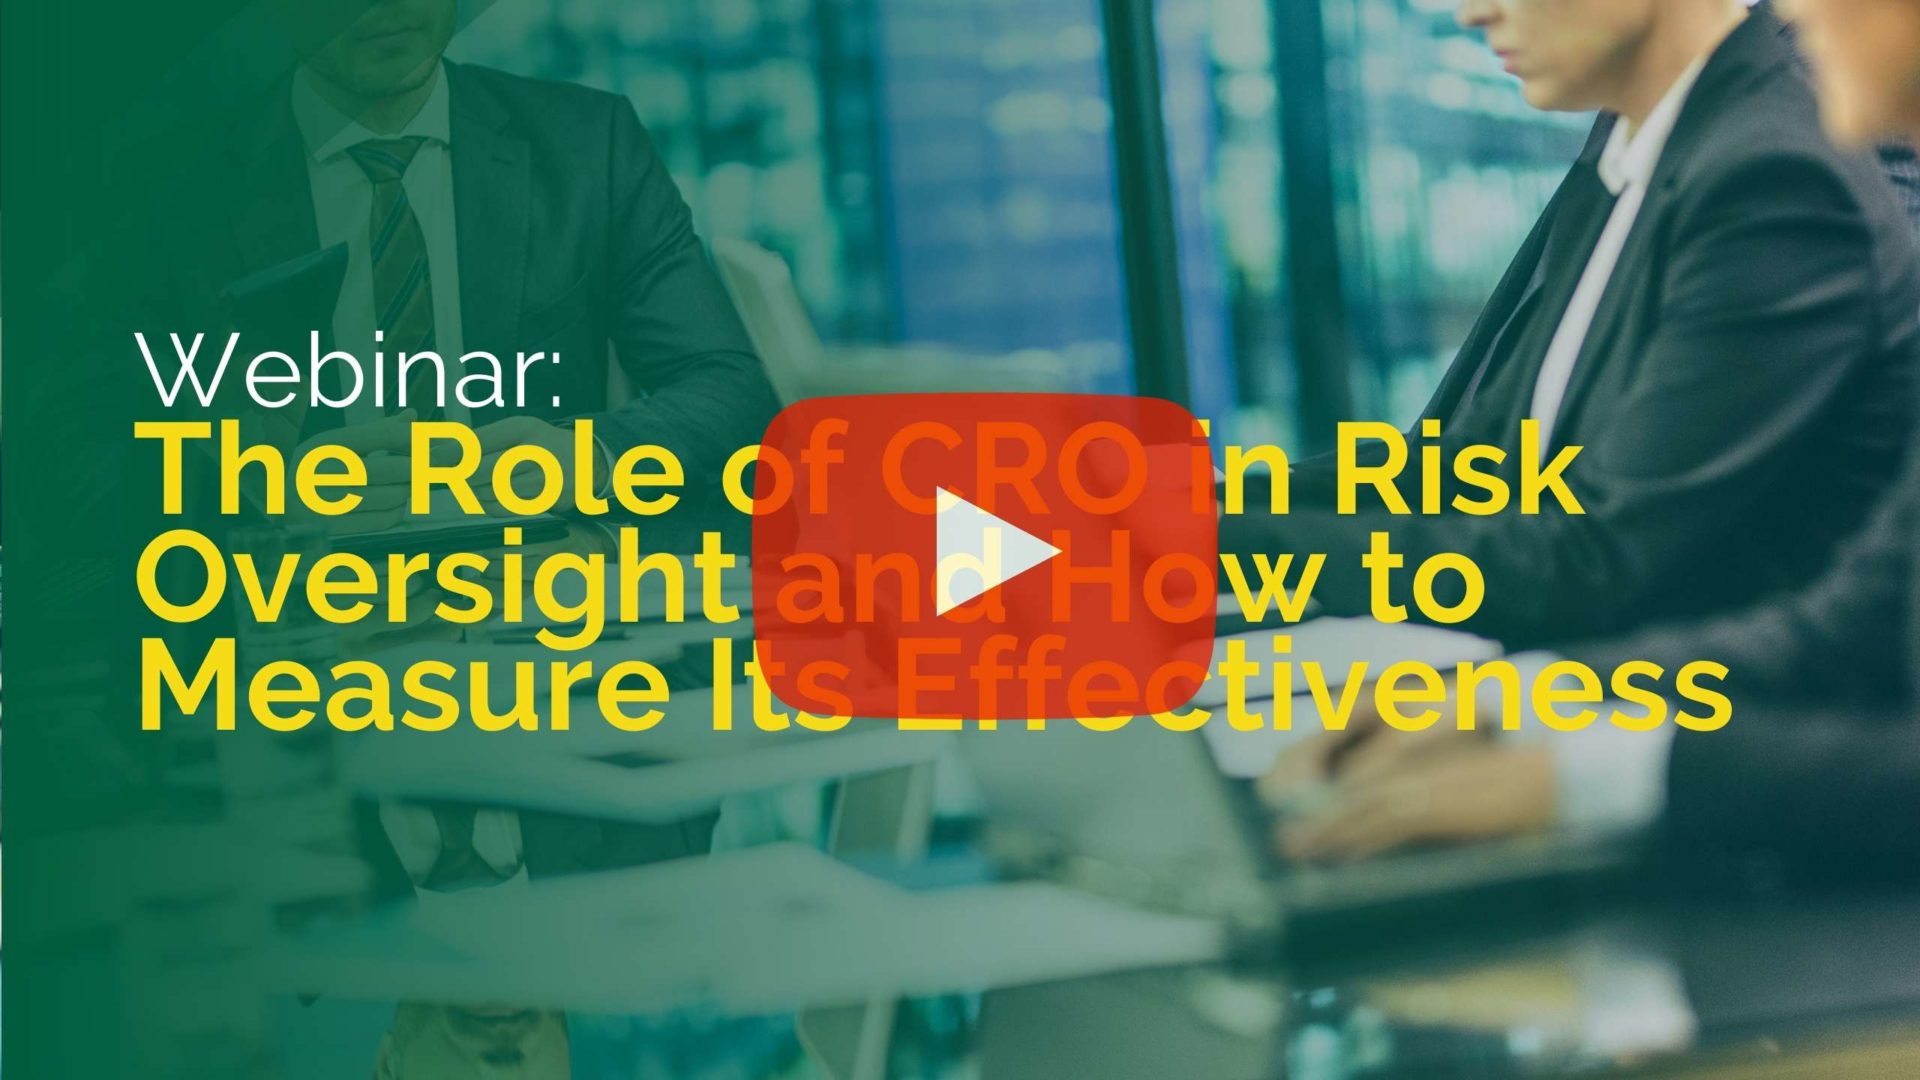 Webinar: The Role of CRO in Risk Oversight and How to Measure Its Effectiveness